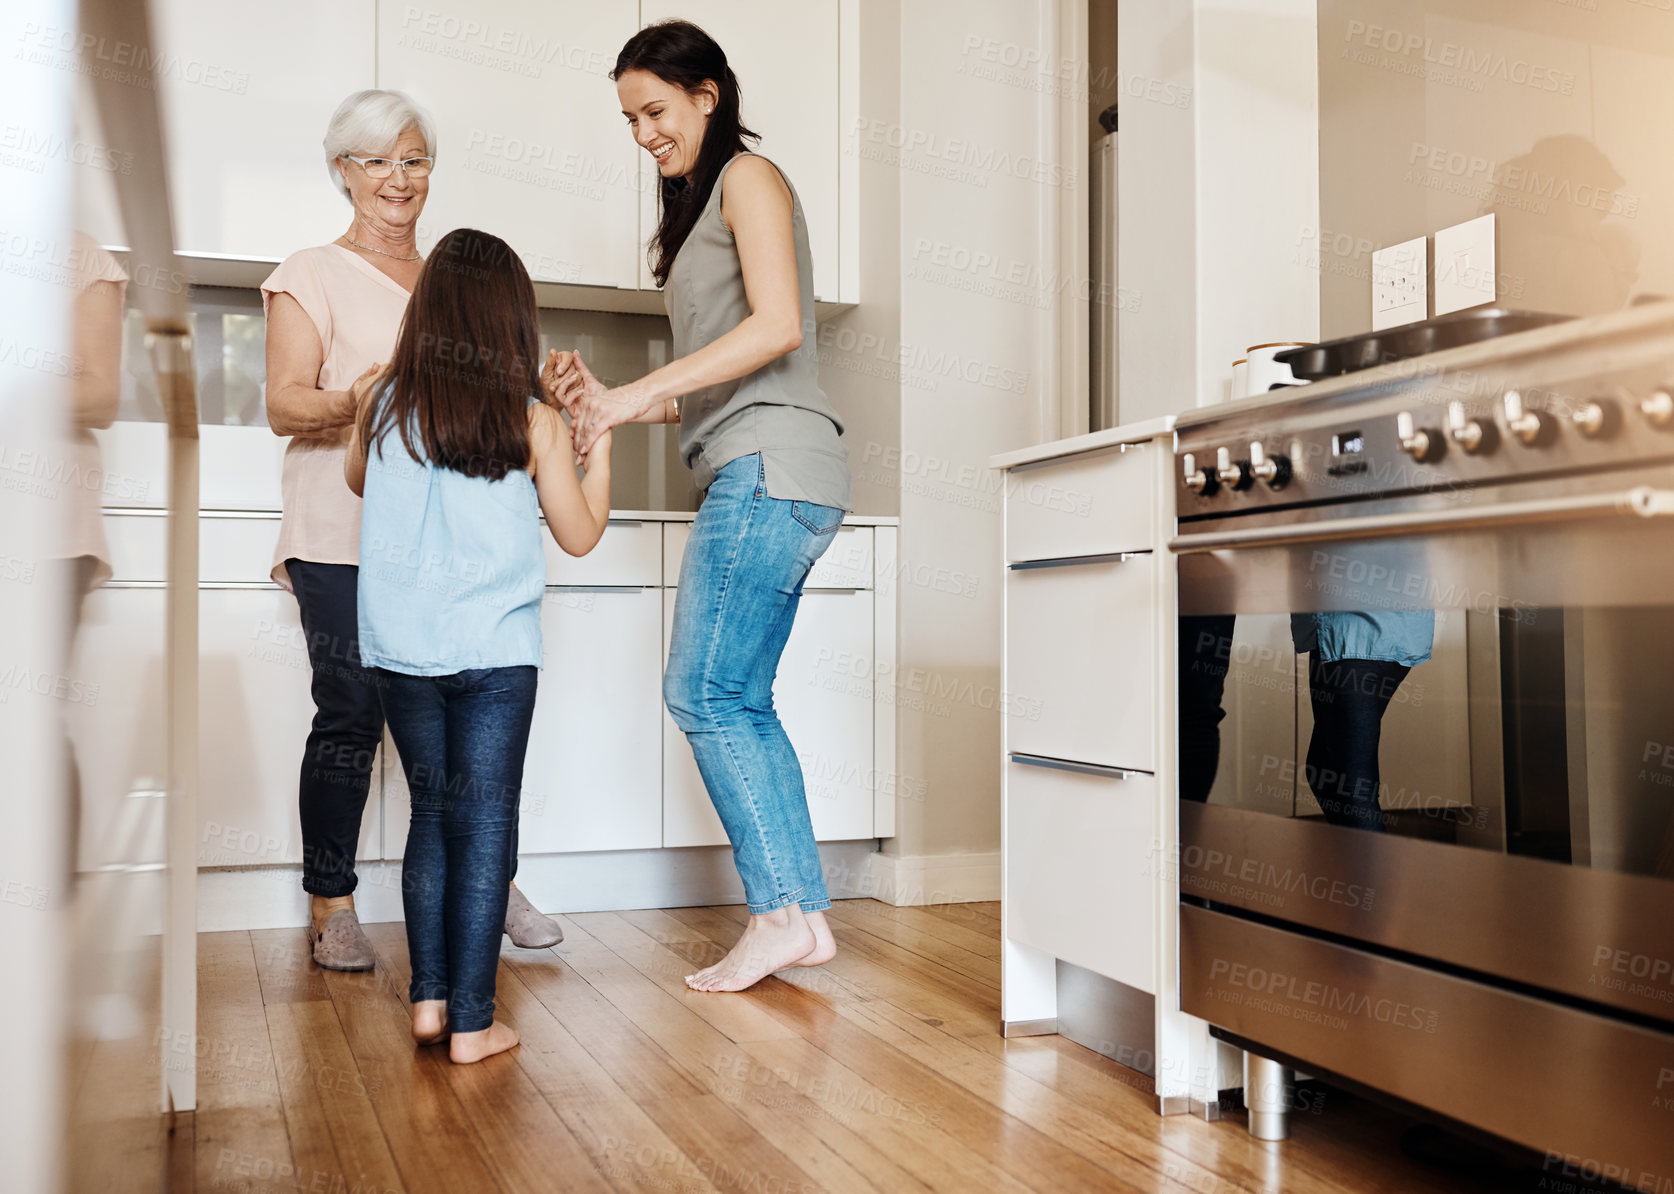 Buy stock photo Shot of an adorable little girl dancing with her mother and granny at home